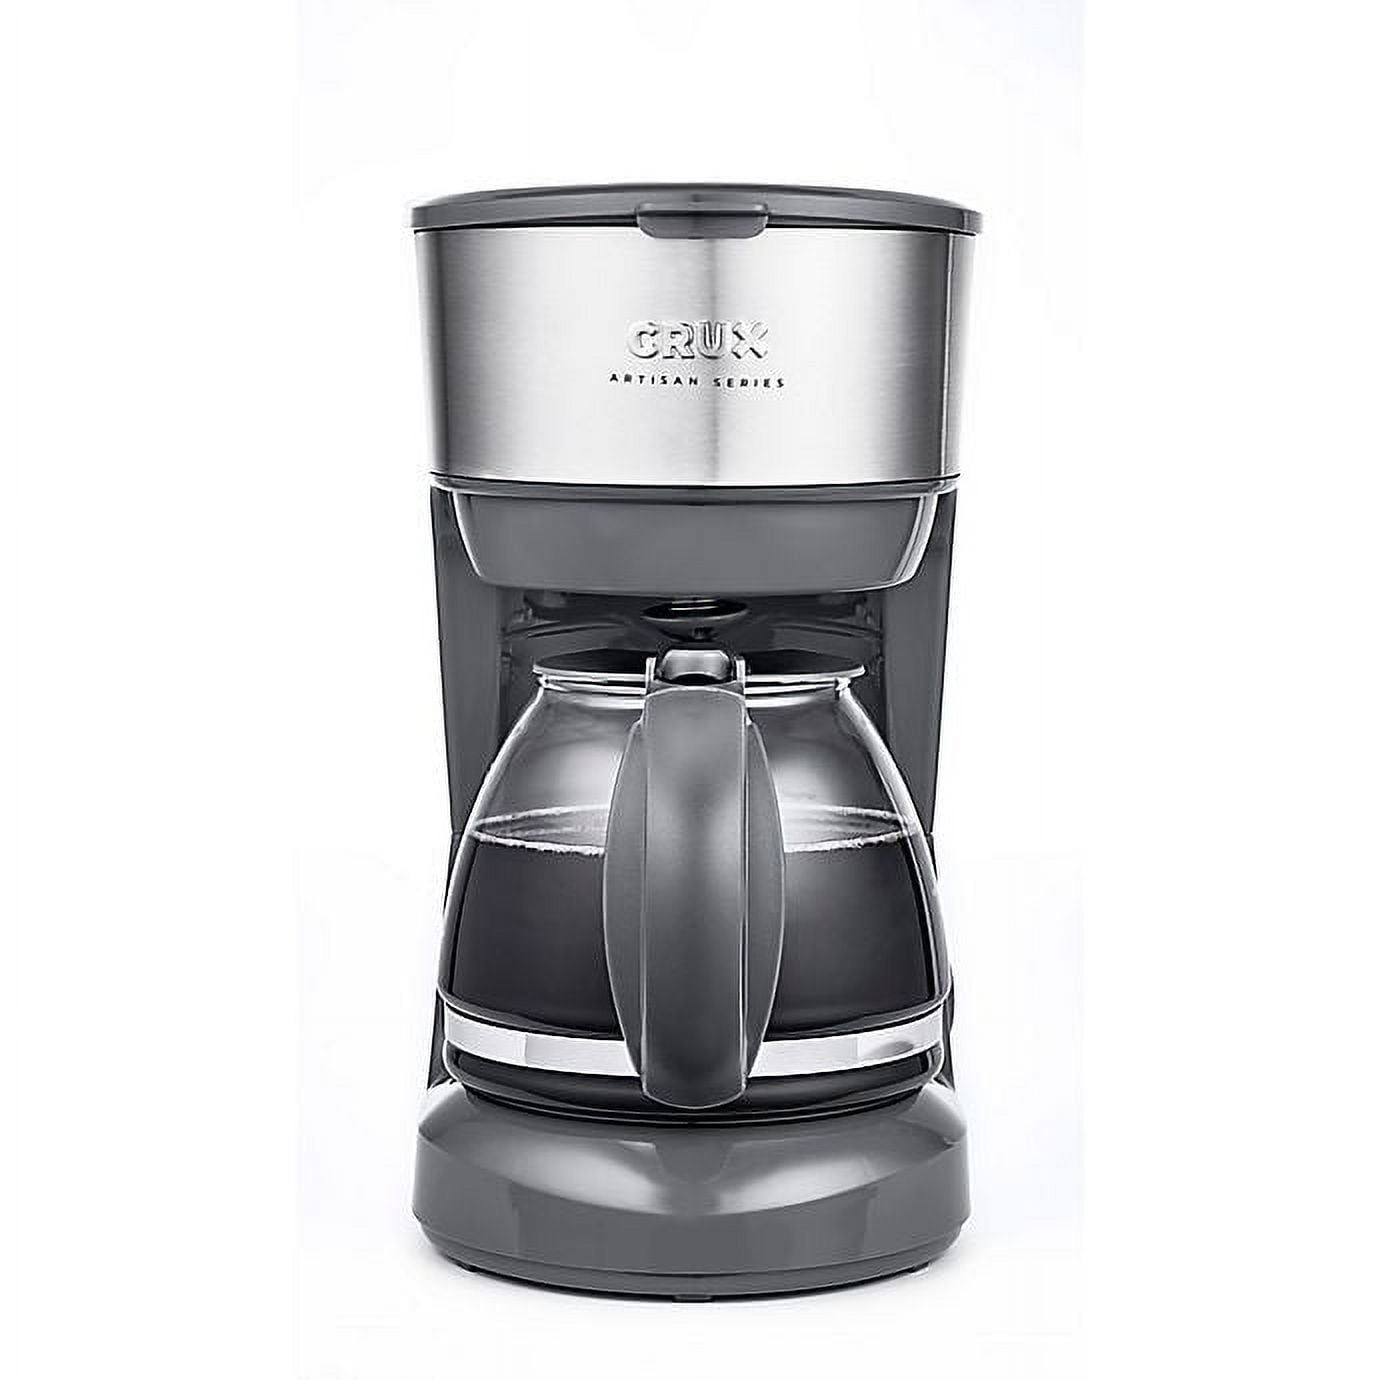 Crux Coffee Maker Reviews - Tested By The Experts